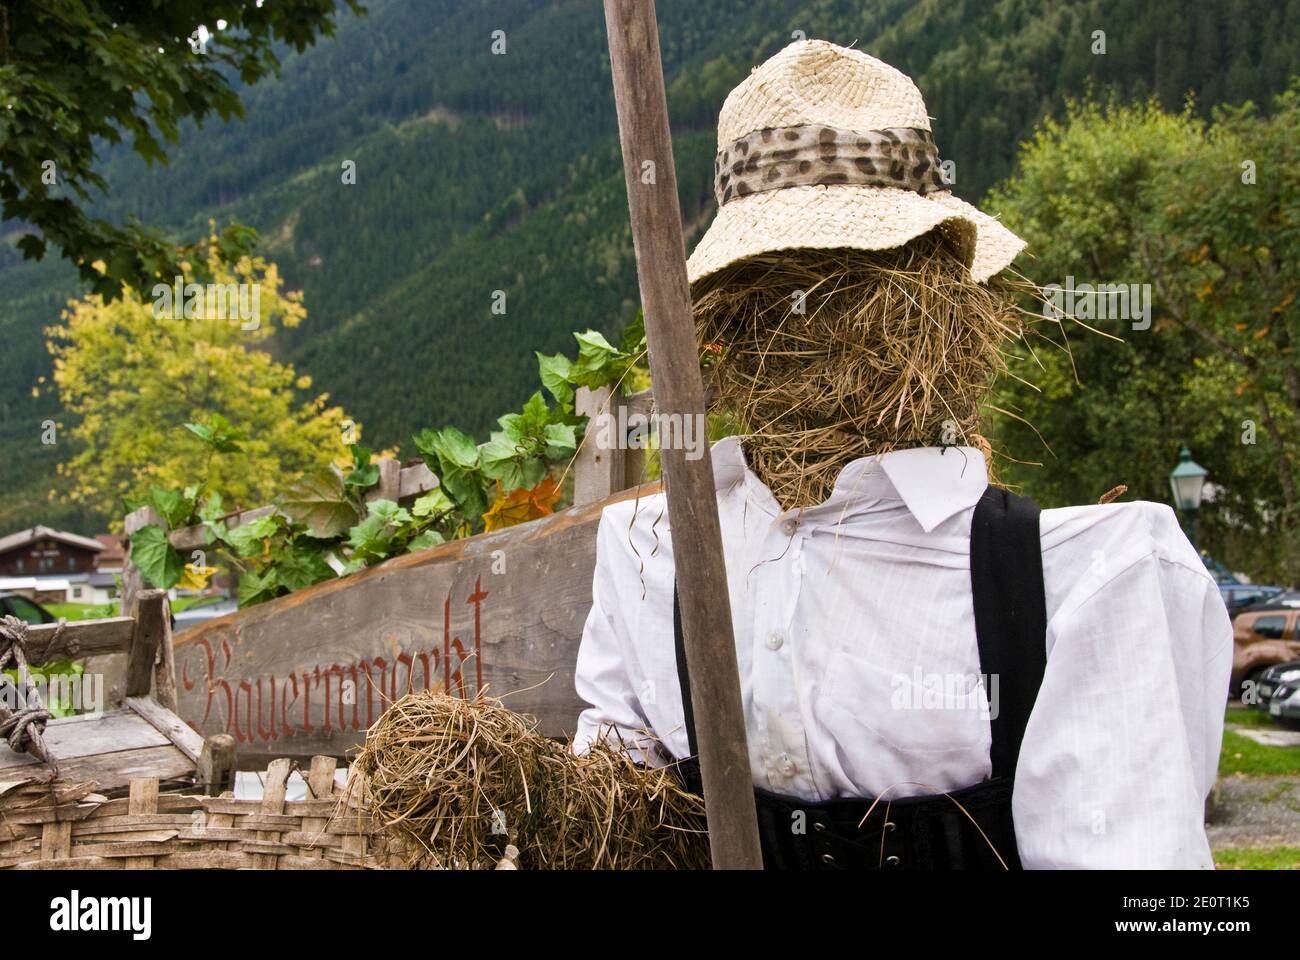 An Austrian scarecrow welcomes visitors to the farmers market in village of Krimml, Austria. Stock Photo